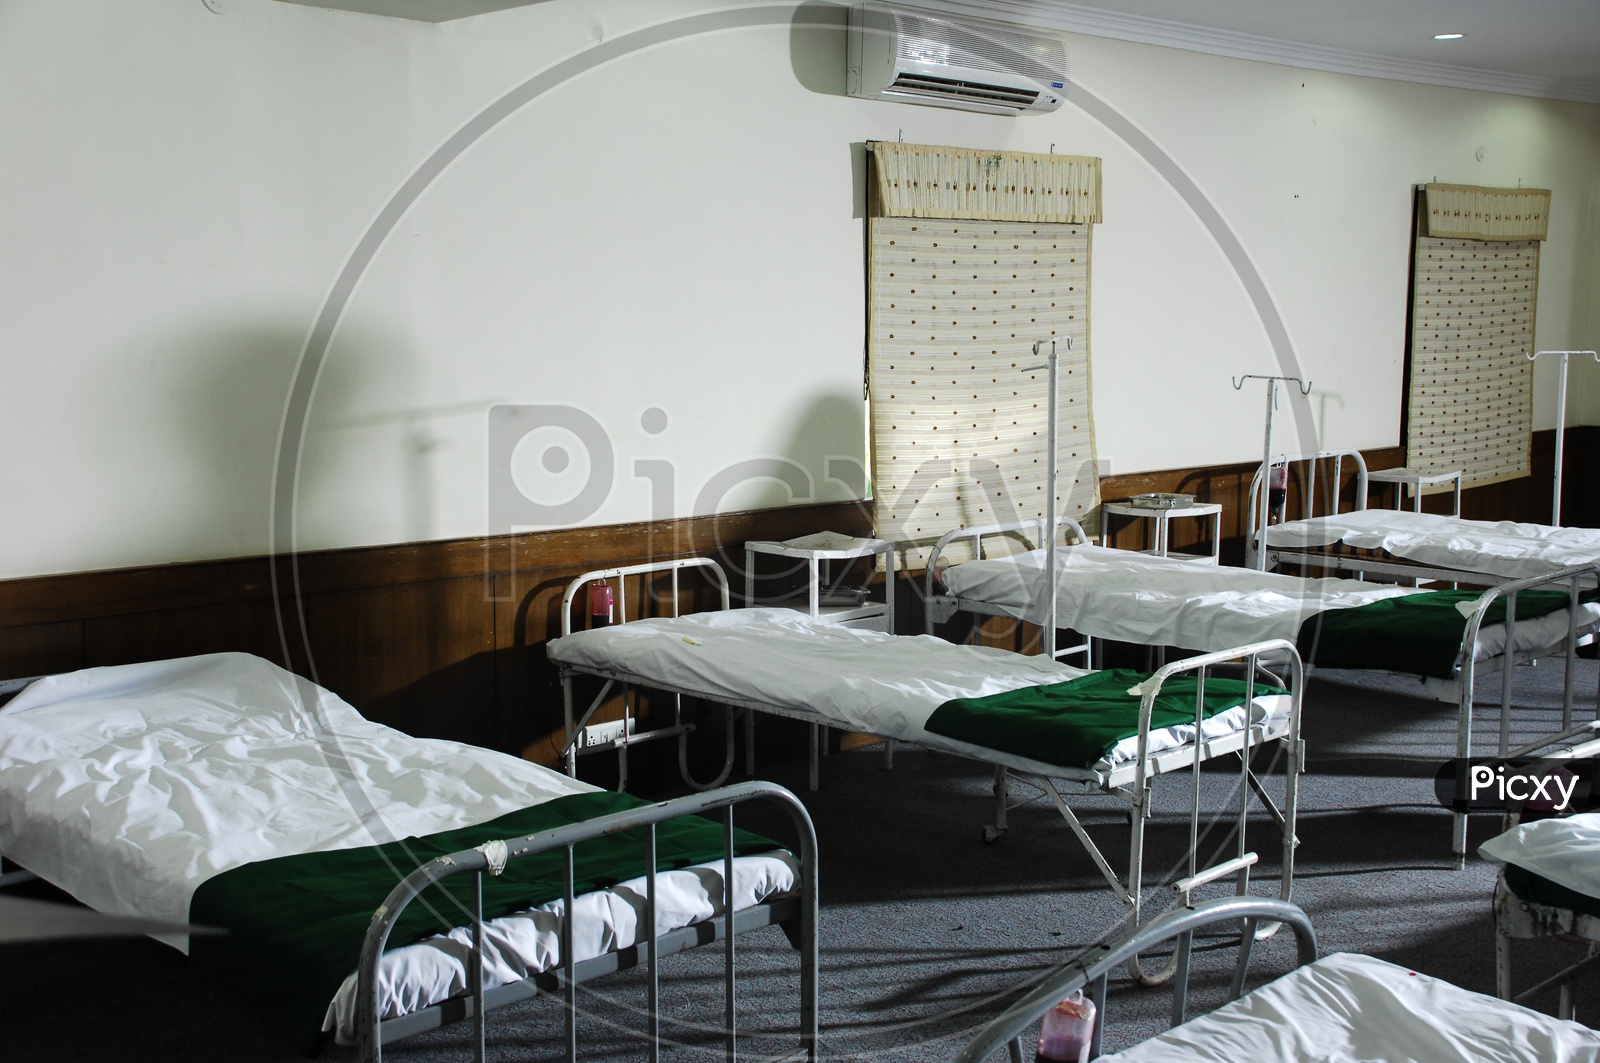 General Ward Patient beds in a Hospital